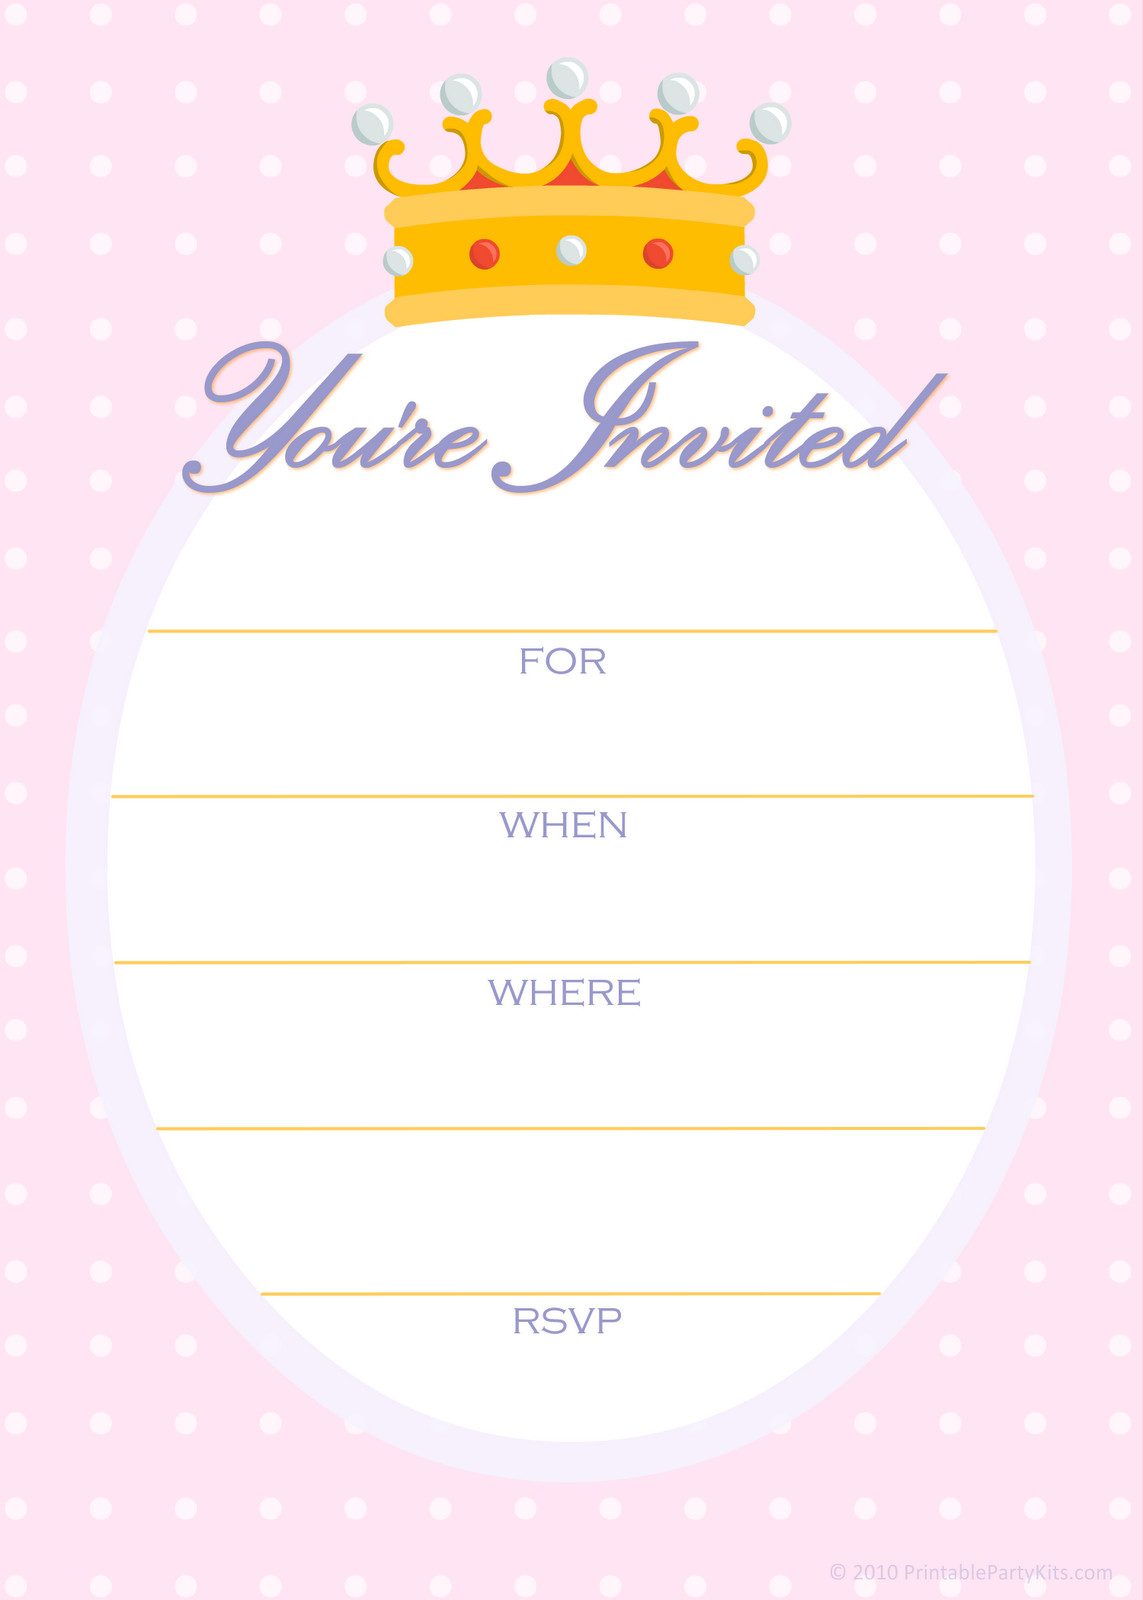 Free Printable Party Invitations Free Invitations for a